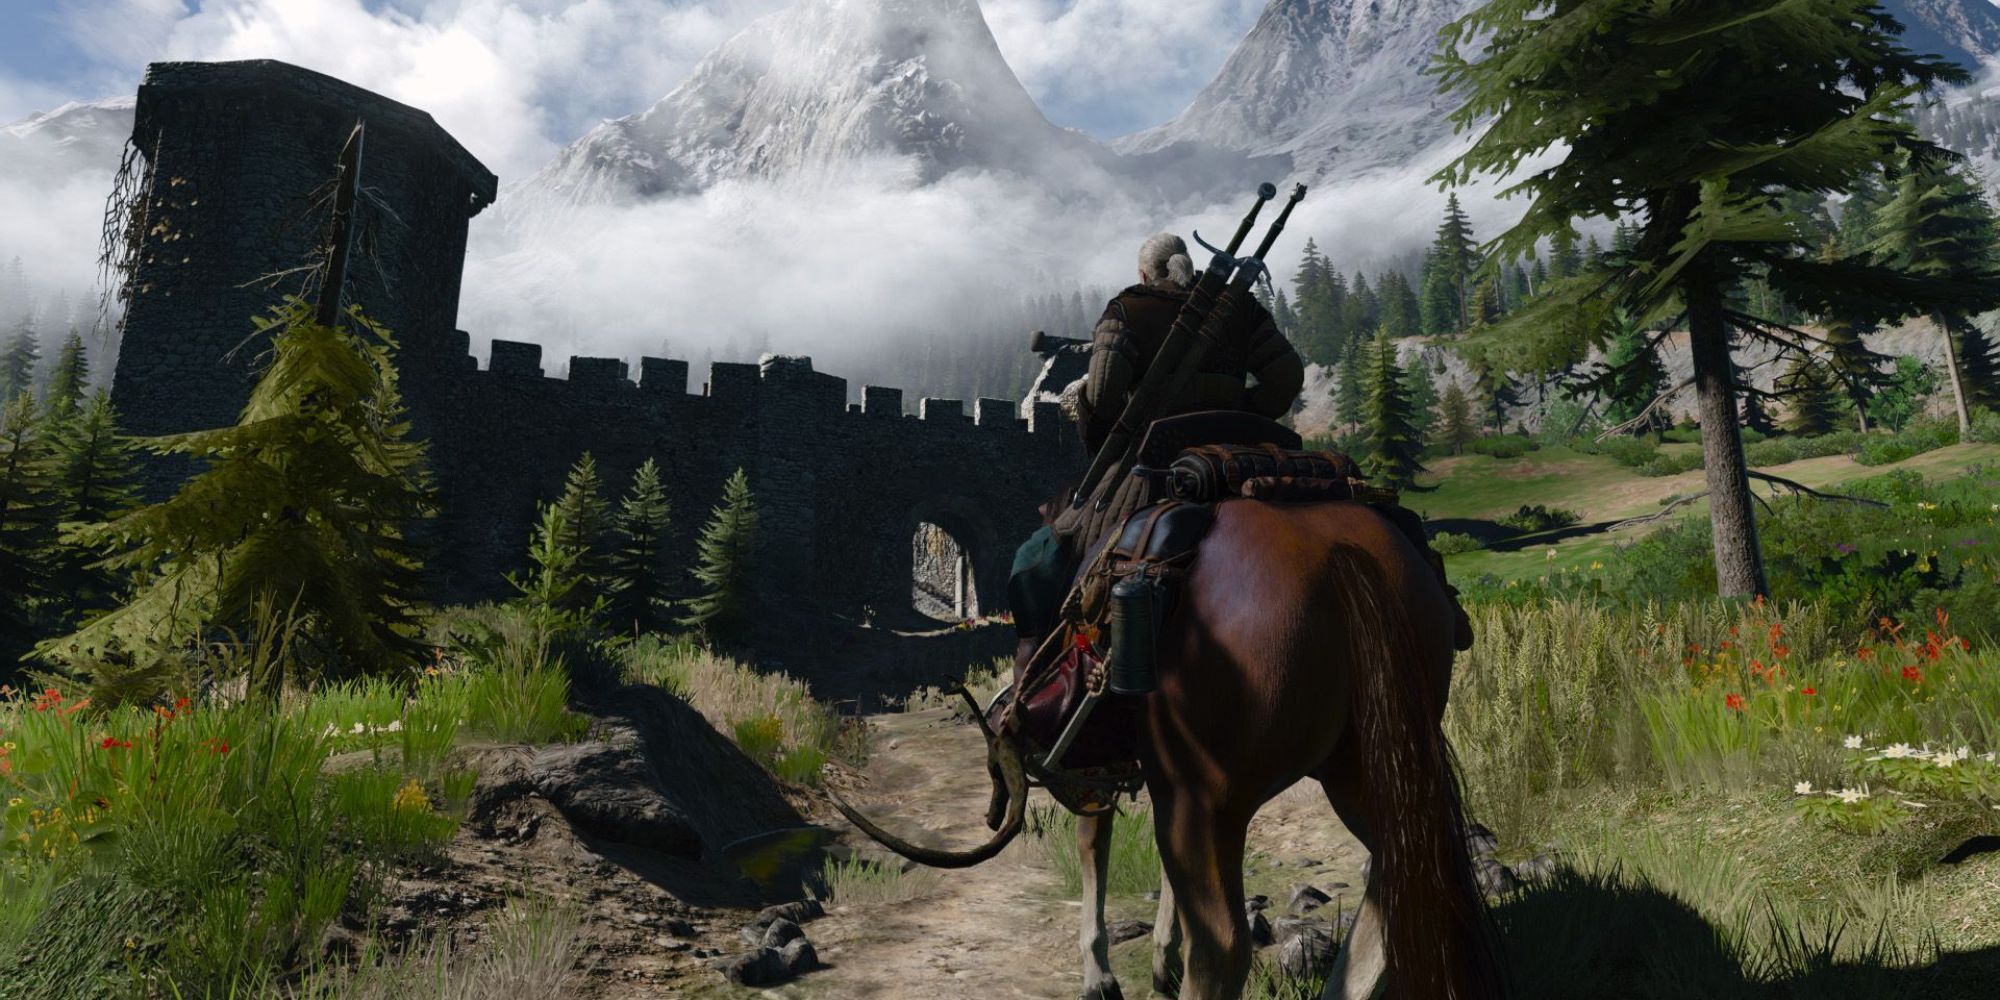 Geralt rides toward an old fortification in Kaer Morhen's valley in The Witcher 3.